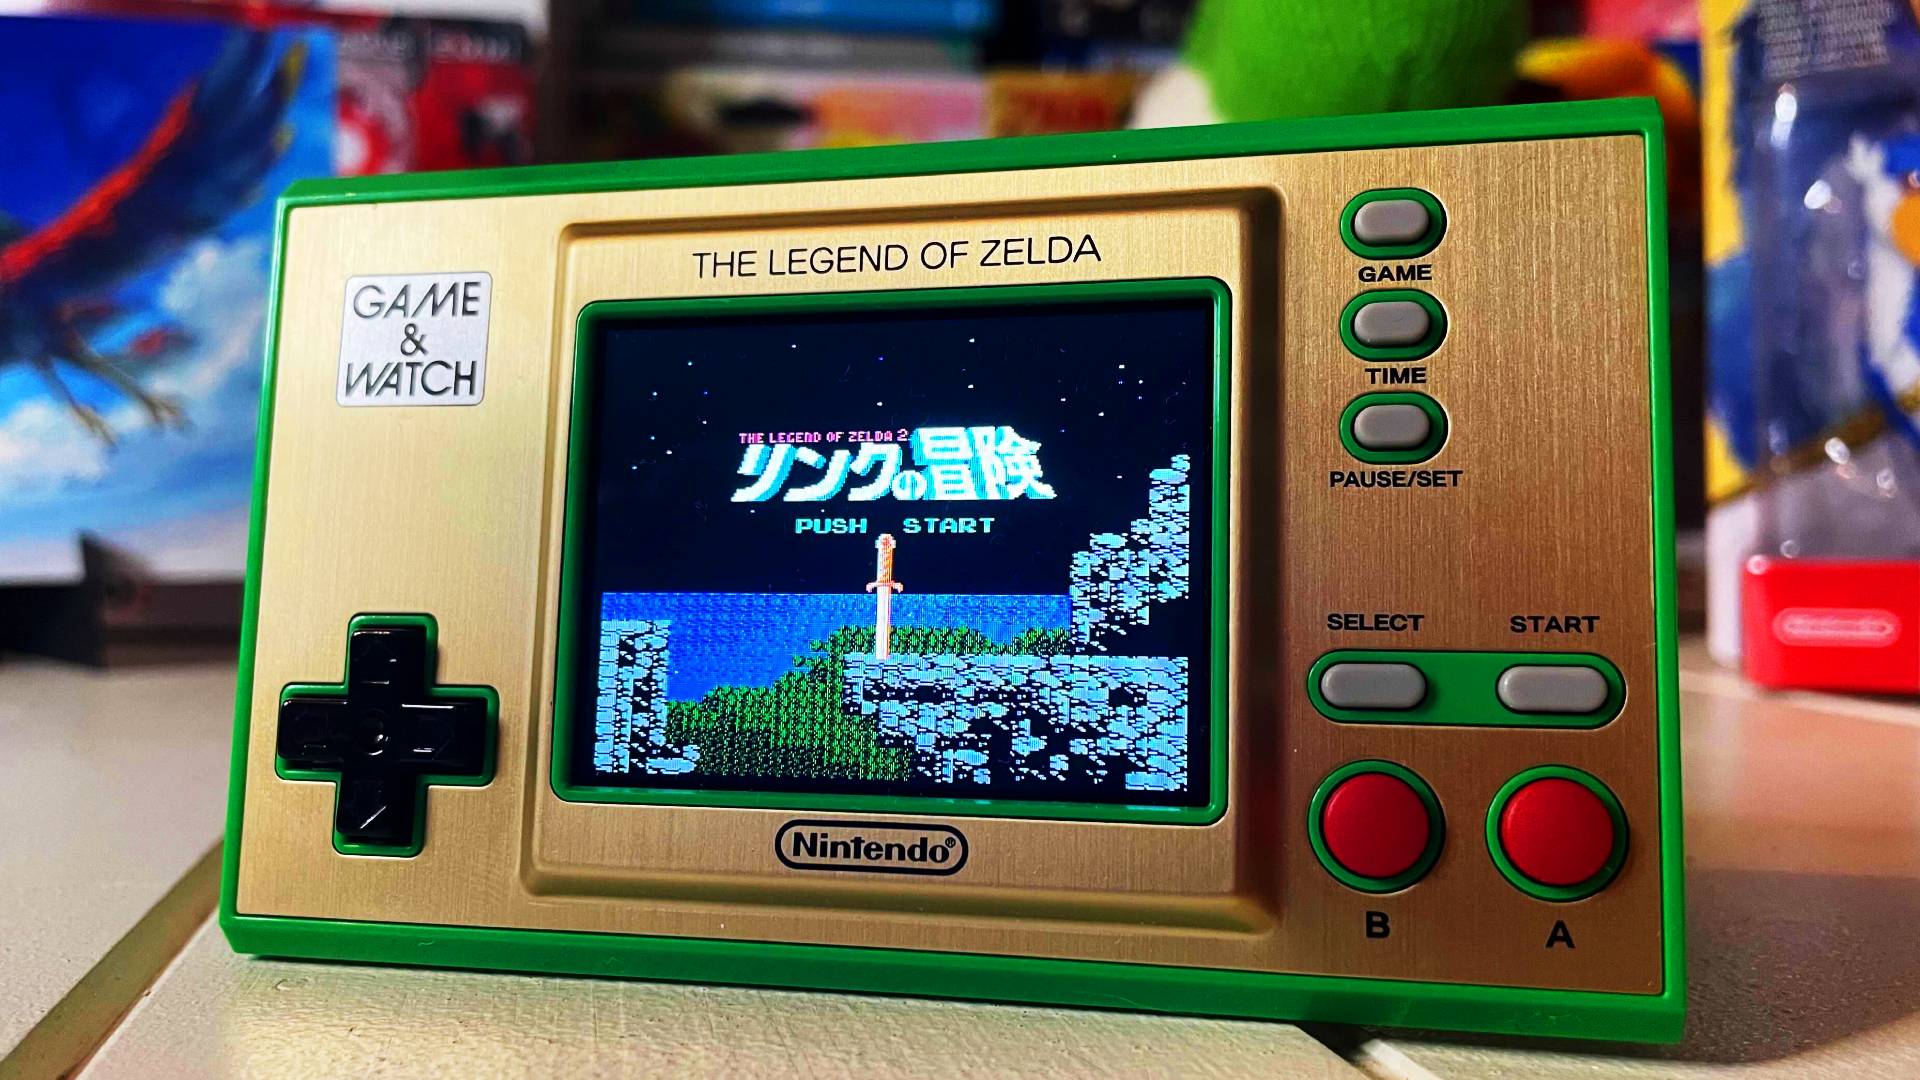 Game & Watch: Legend of Zelda Anniversary Edition review – the